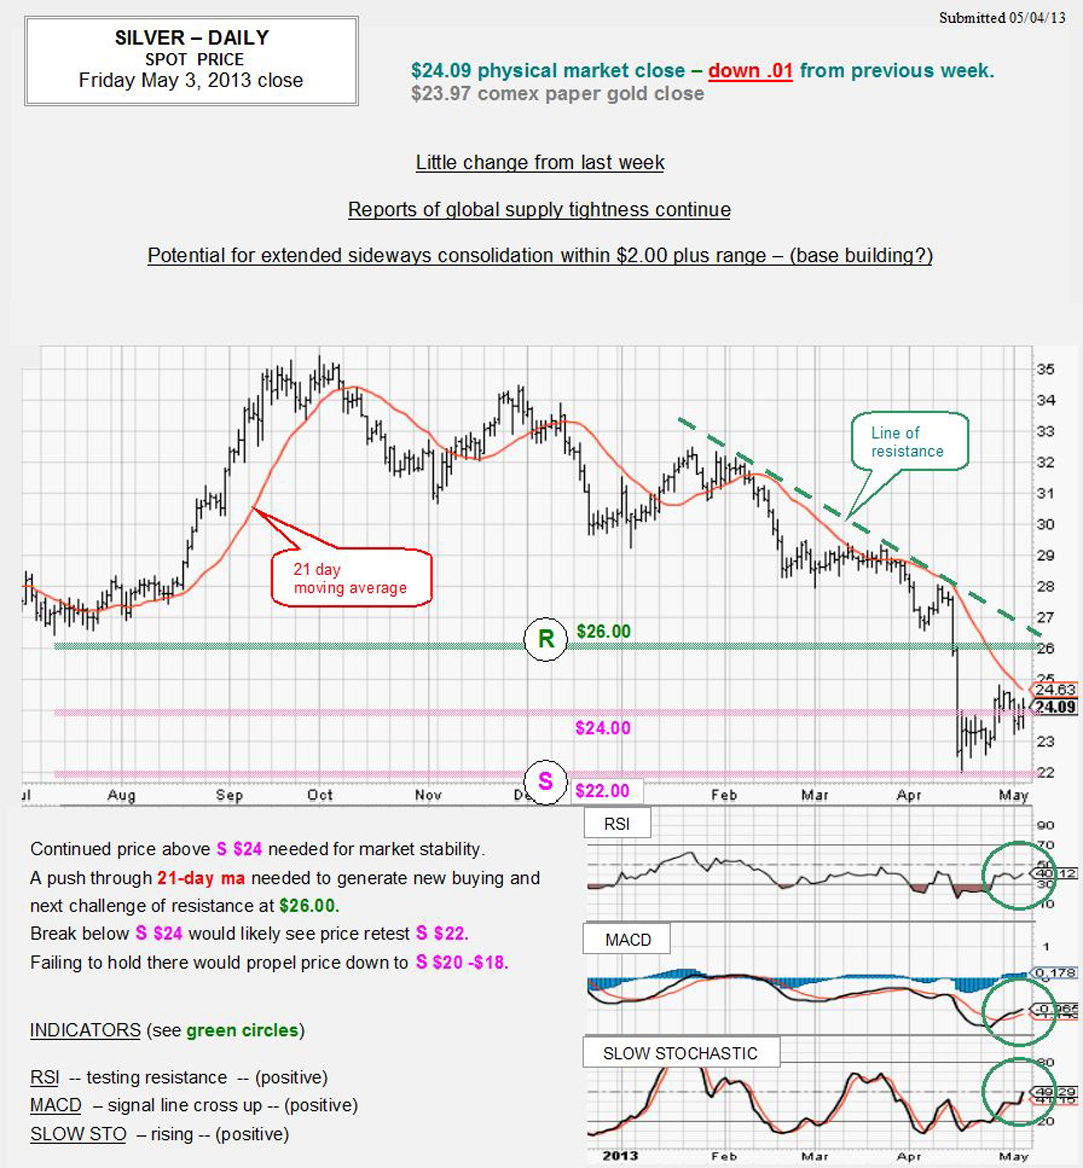 MAY 3, 2013 chart & commentary